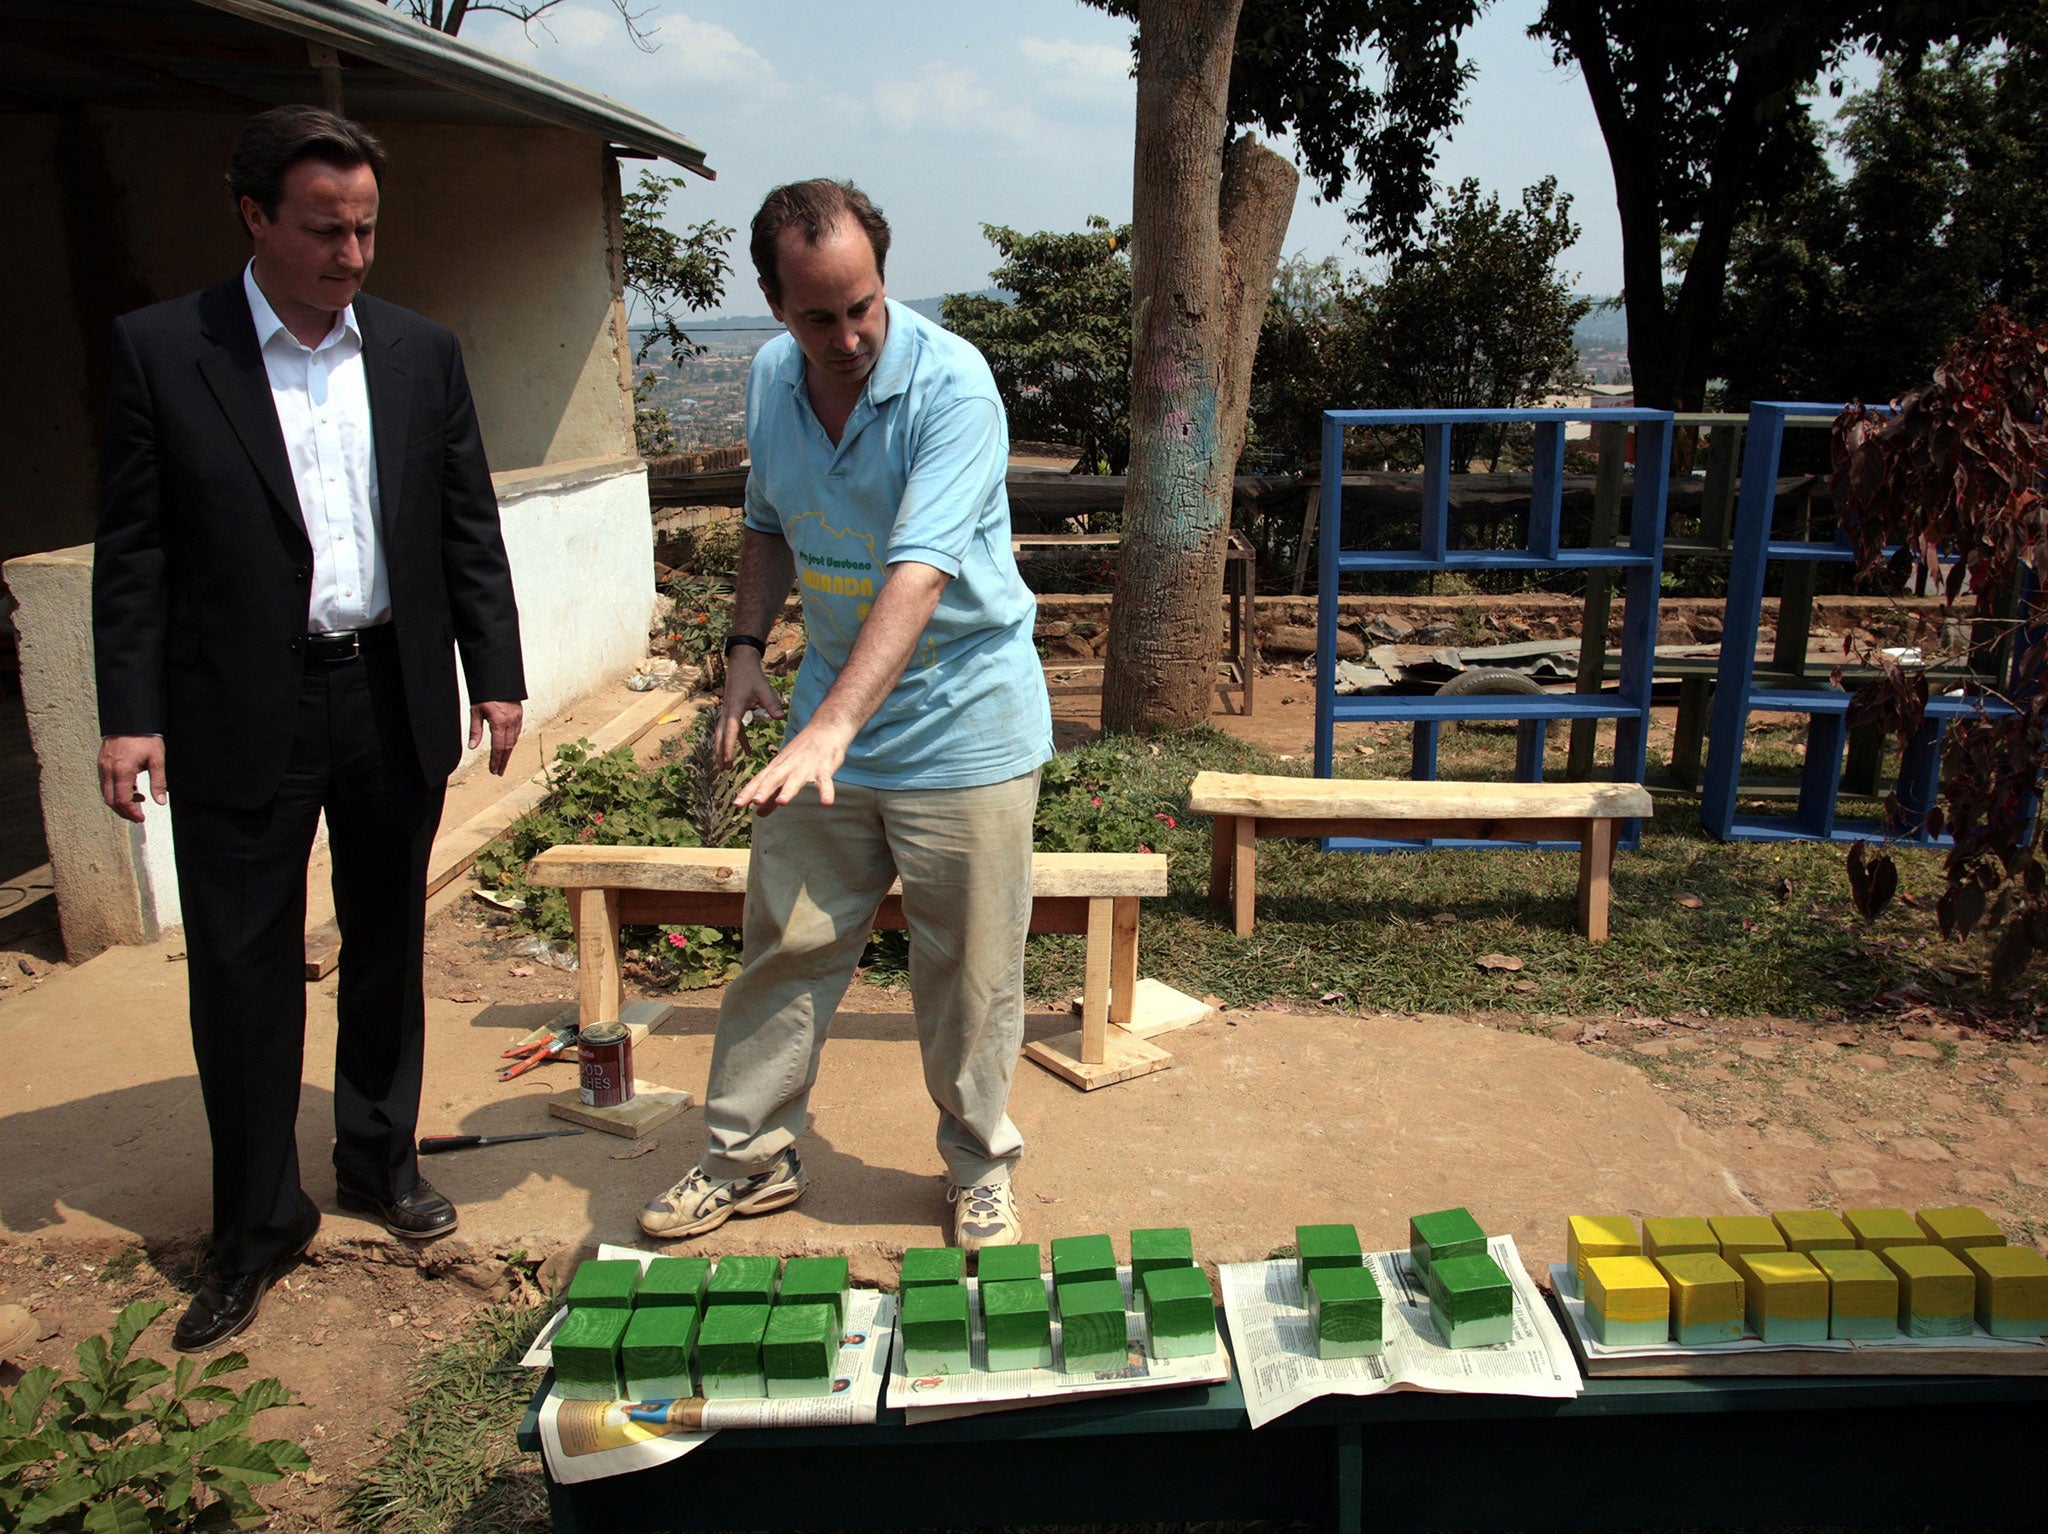 David Cameron, then Leader of the Opposition, during a visit to an orphanage in Rwanda, in 2007. He has repeatedly spoken of his pride that his government has boosted spending on foreign aid